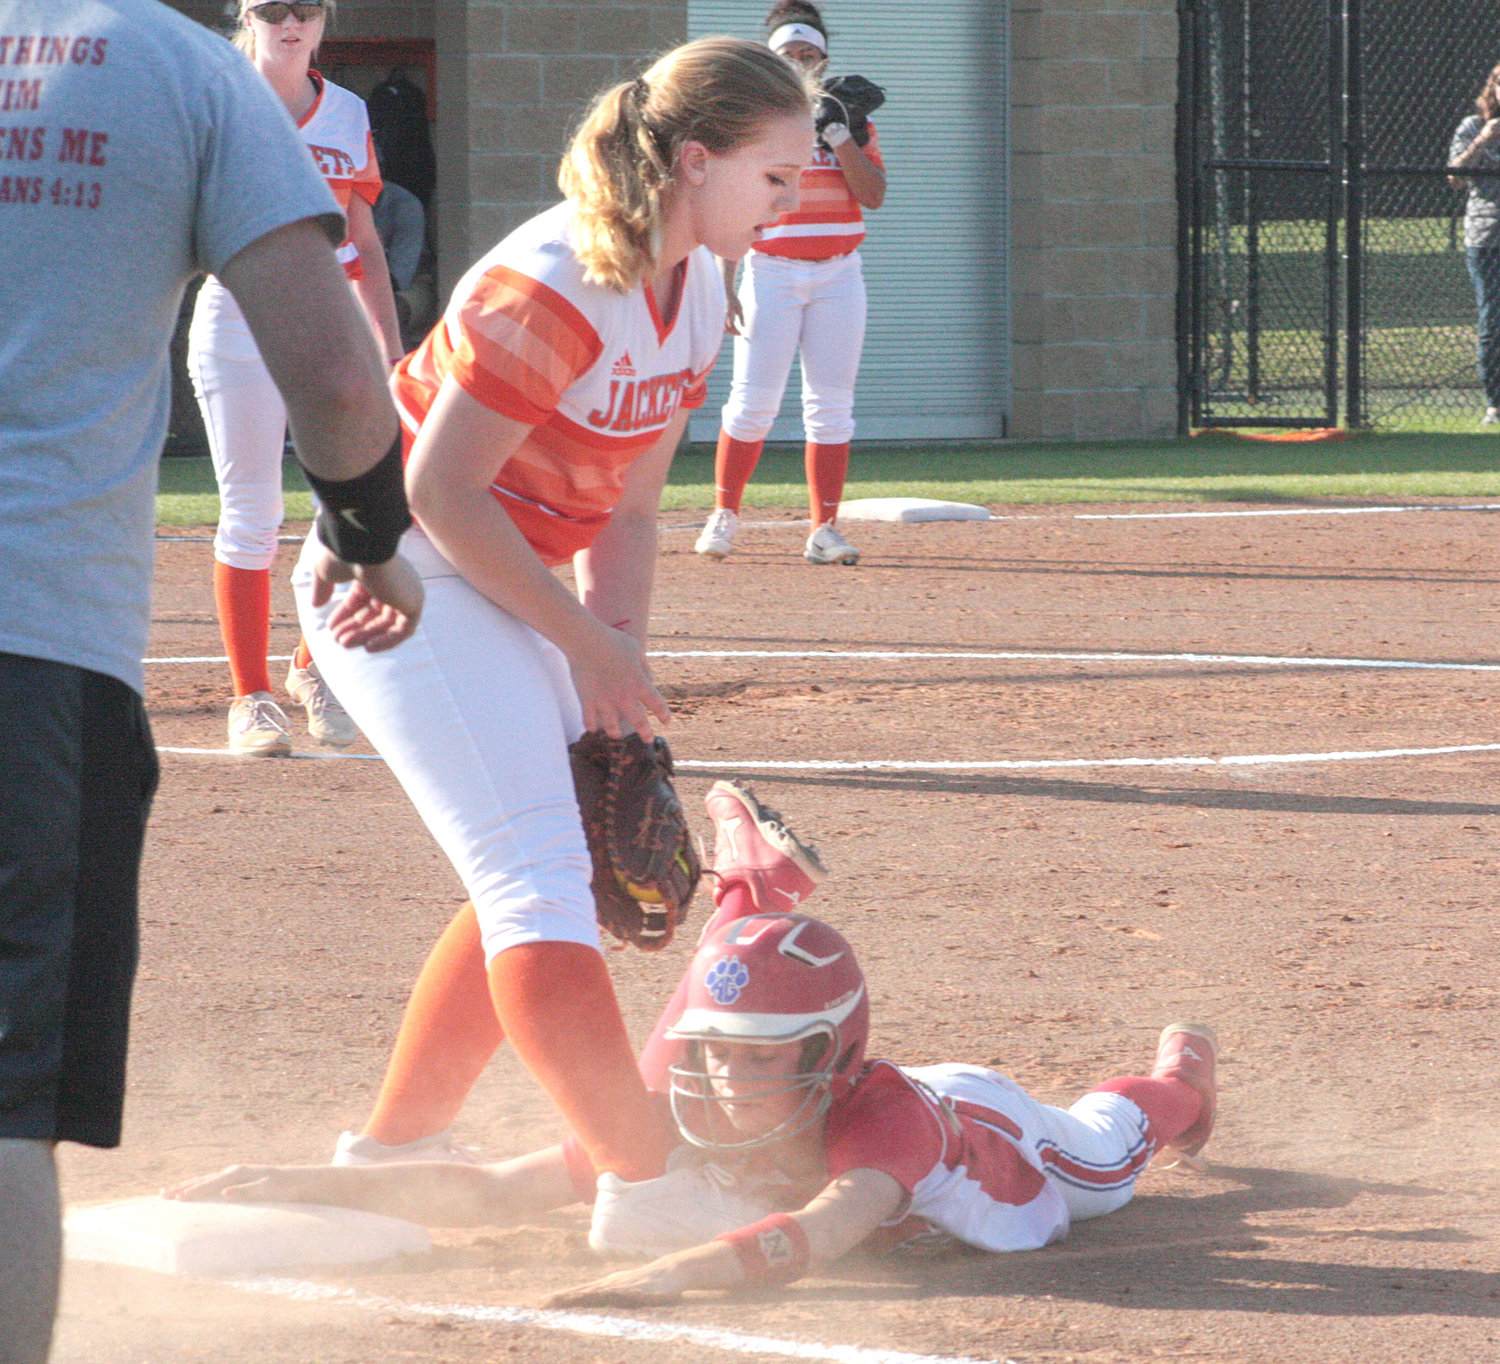 Alba-Golden’s Morgan Curtis slides back into first base safely under the tag of Mineola first baseman Eden Trent during the third inning of their game last Monday afternoon in Mineola.